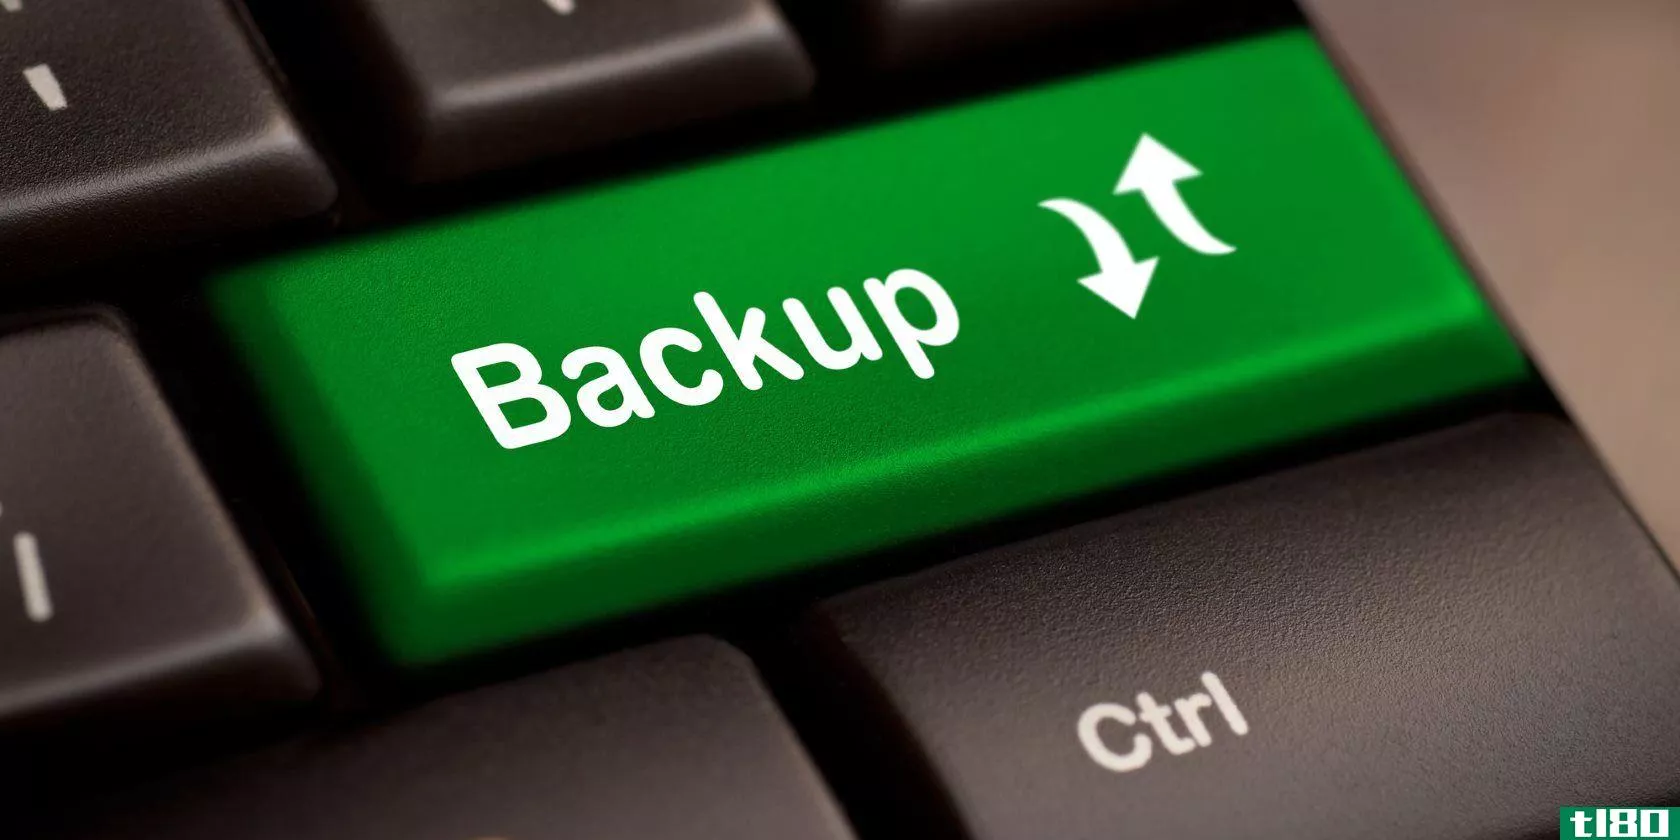 backup-computer-key-in-green-for-archiving-and-storage